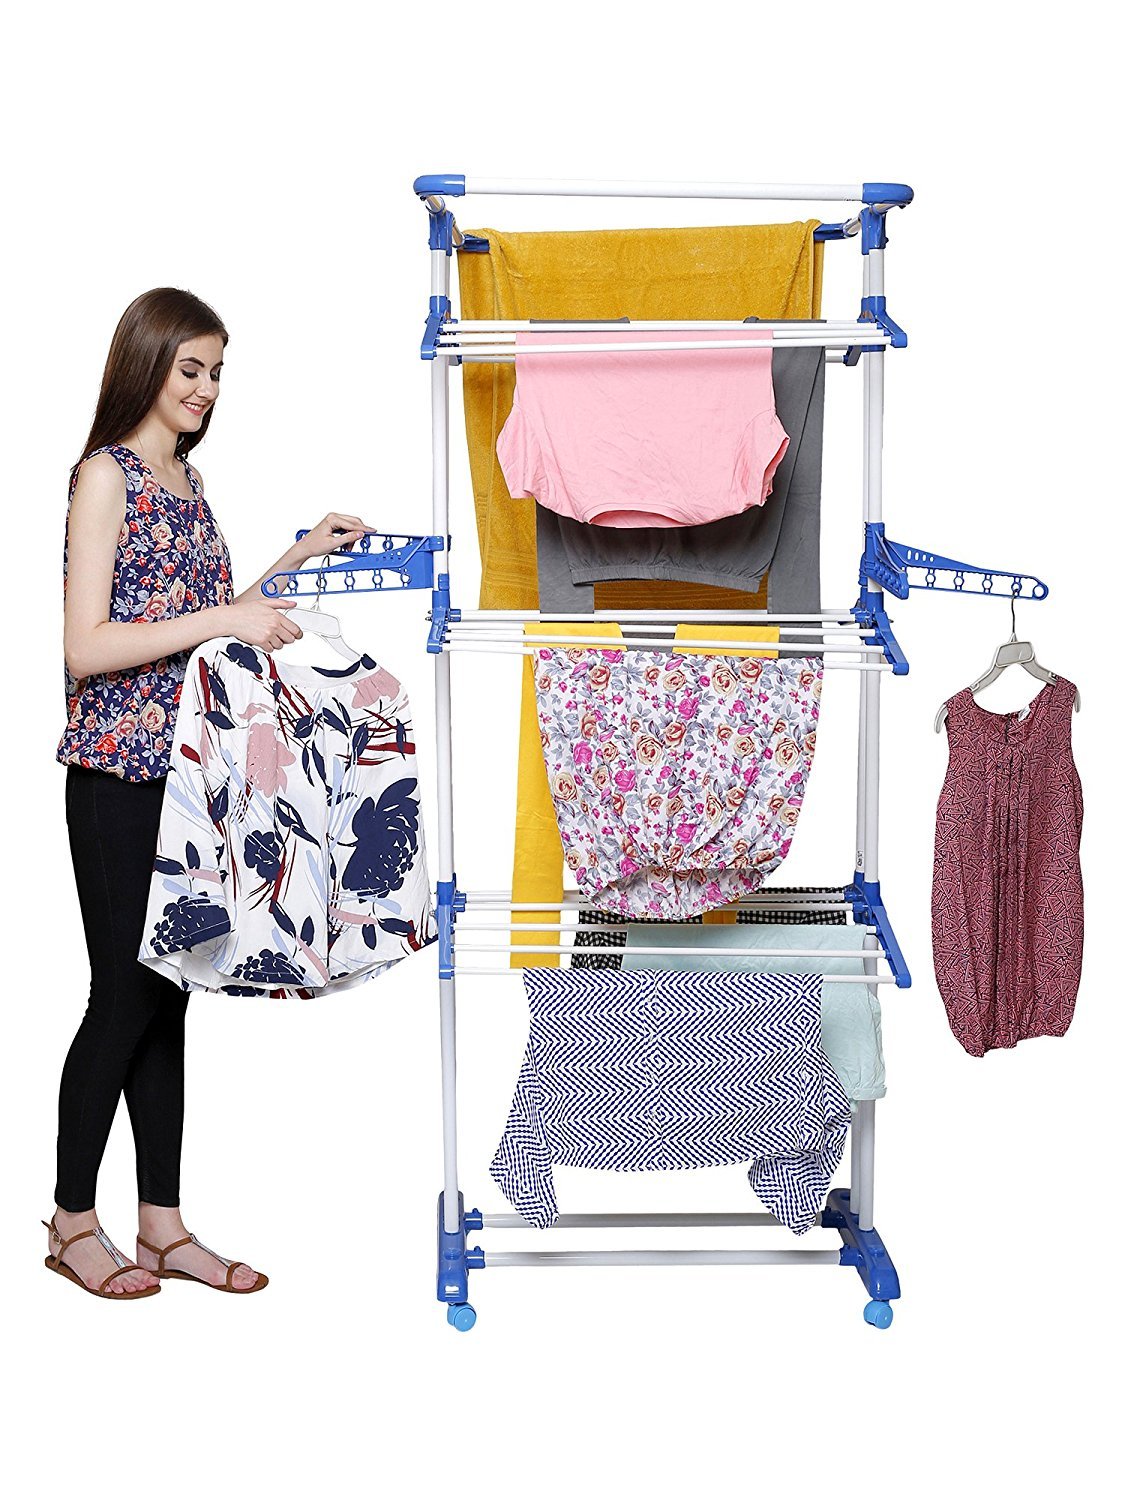 Buy Clothes Drying Stands , 3 Tier Collapsible Rolling Dryer Clothes Hanger  Rack Rail Stand with Side Wings, Stainless Steel Clothes Airer for Laundry,  Sky Blue, [Made in India] 2 Year Manufacturer